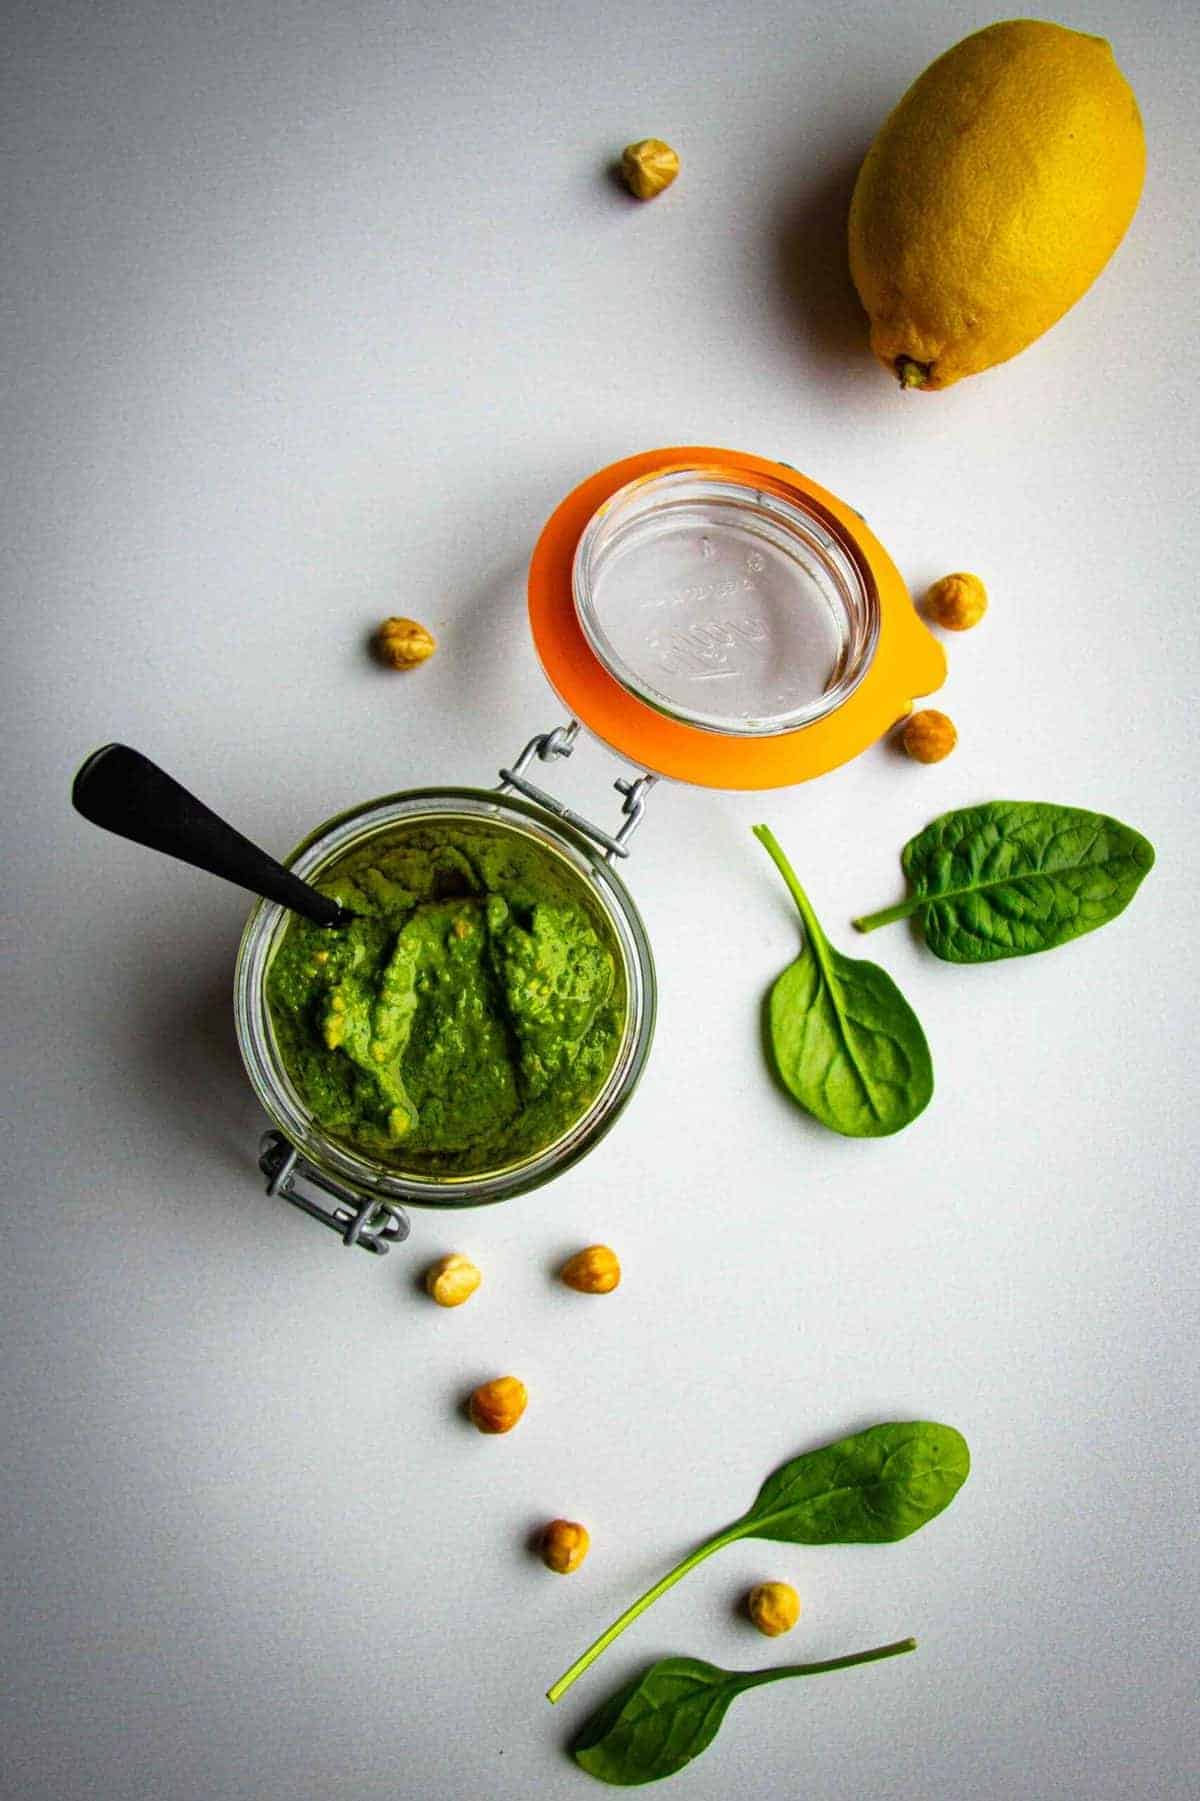 Vegan pesto in a jar with hazelnuts, lemon and spinach.